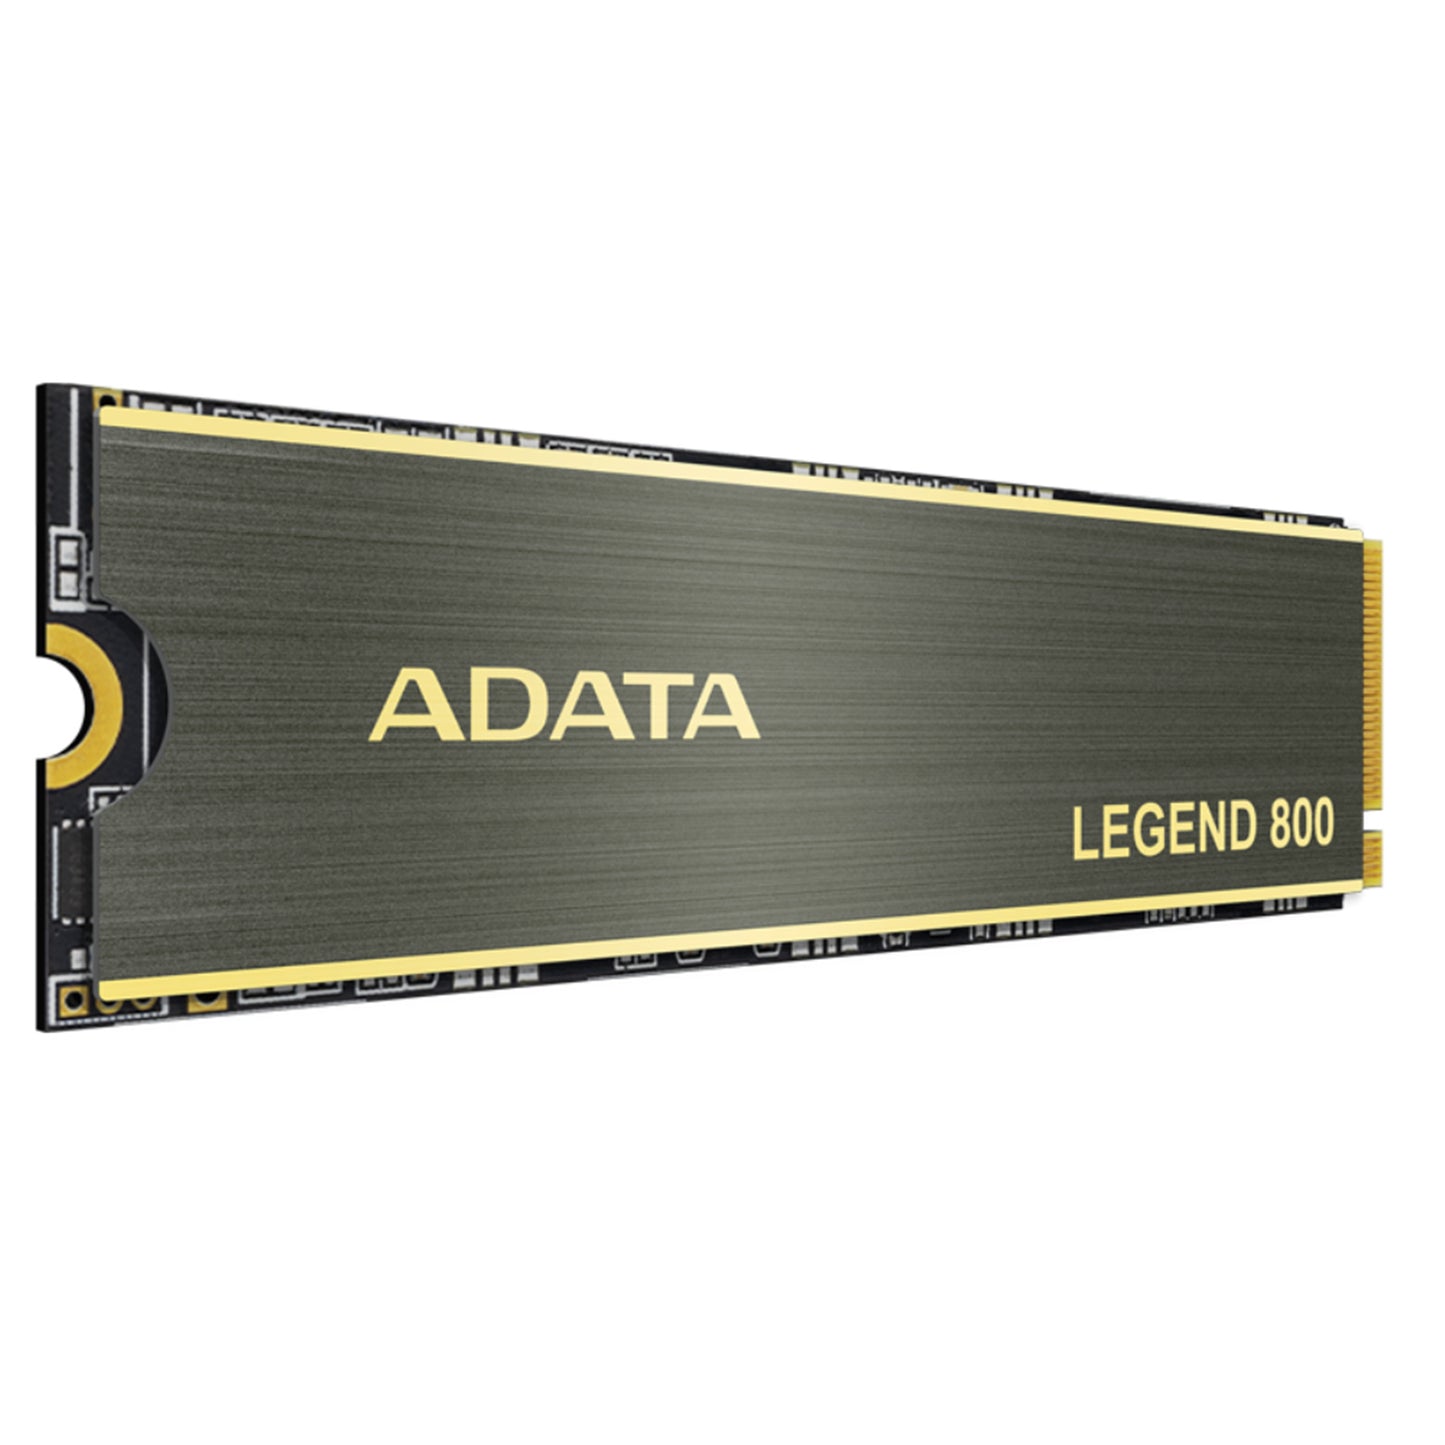 ADATA LEGEND 800 2TB M.2 NVMe Internal SSD PCIe Gen 4 - Up to 3500MB/s Read - Up to 2800MB/s Write - Backward Compatible with Gen 3